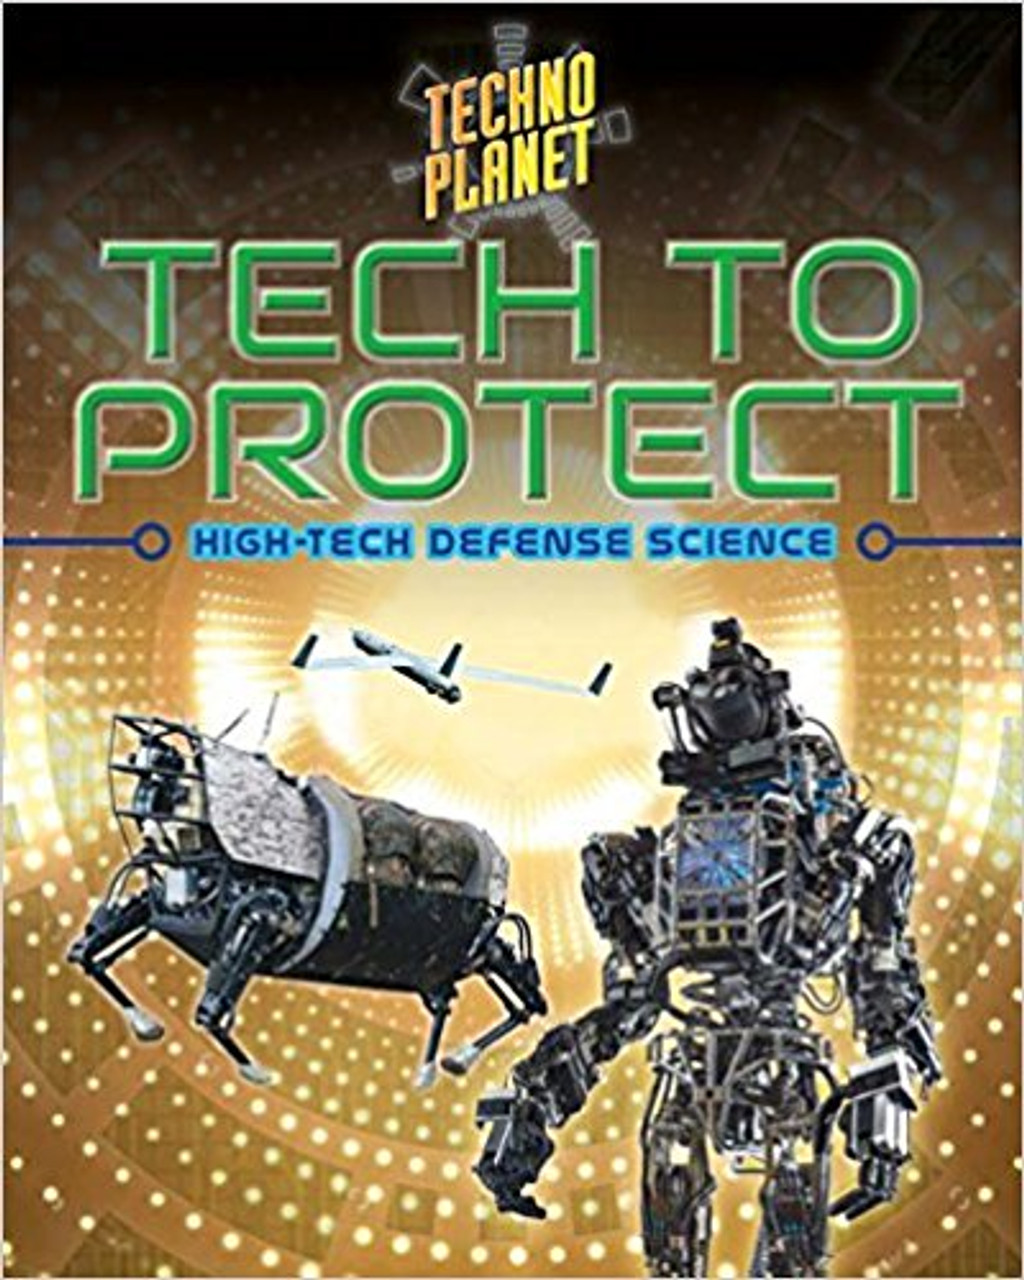 Tech to Protect by James Bow